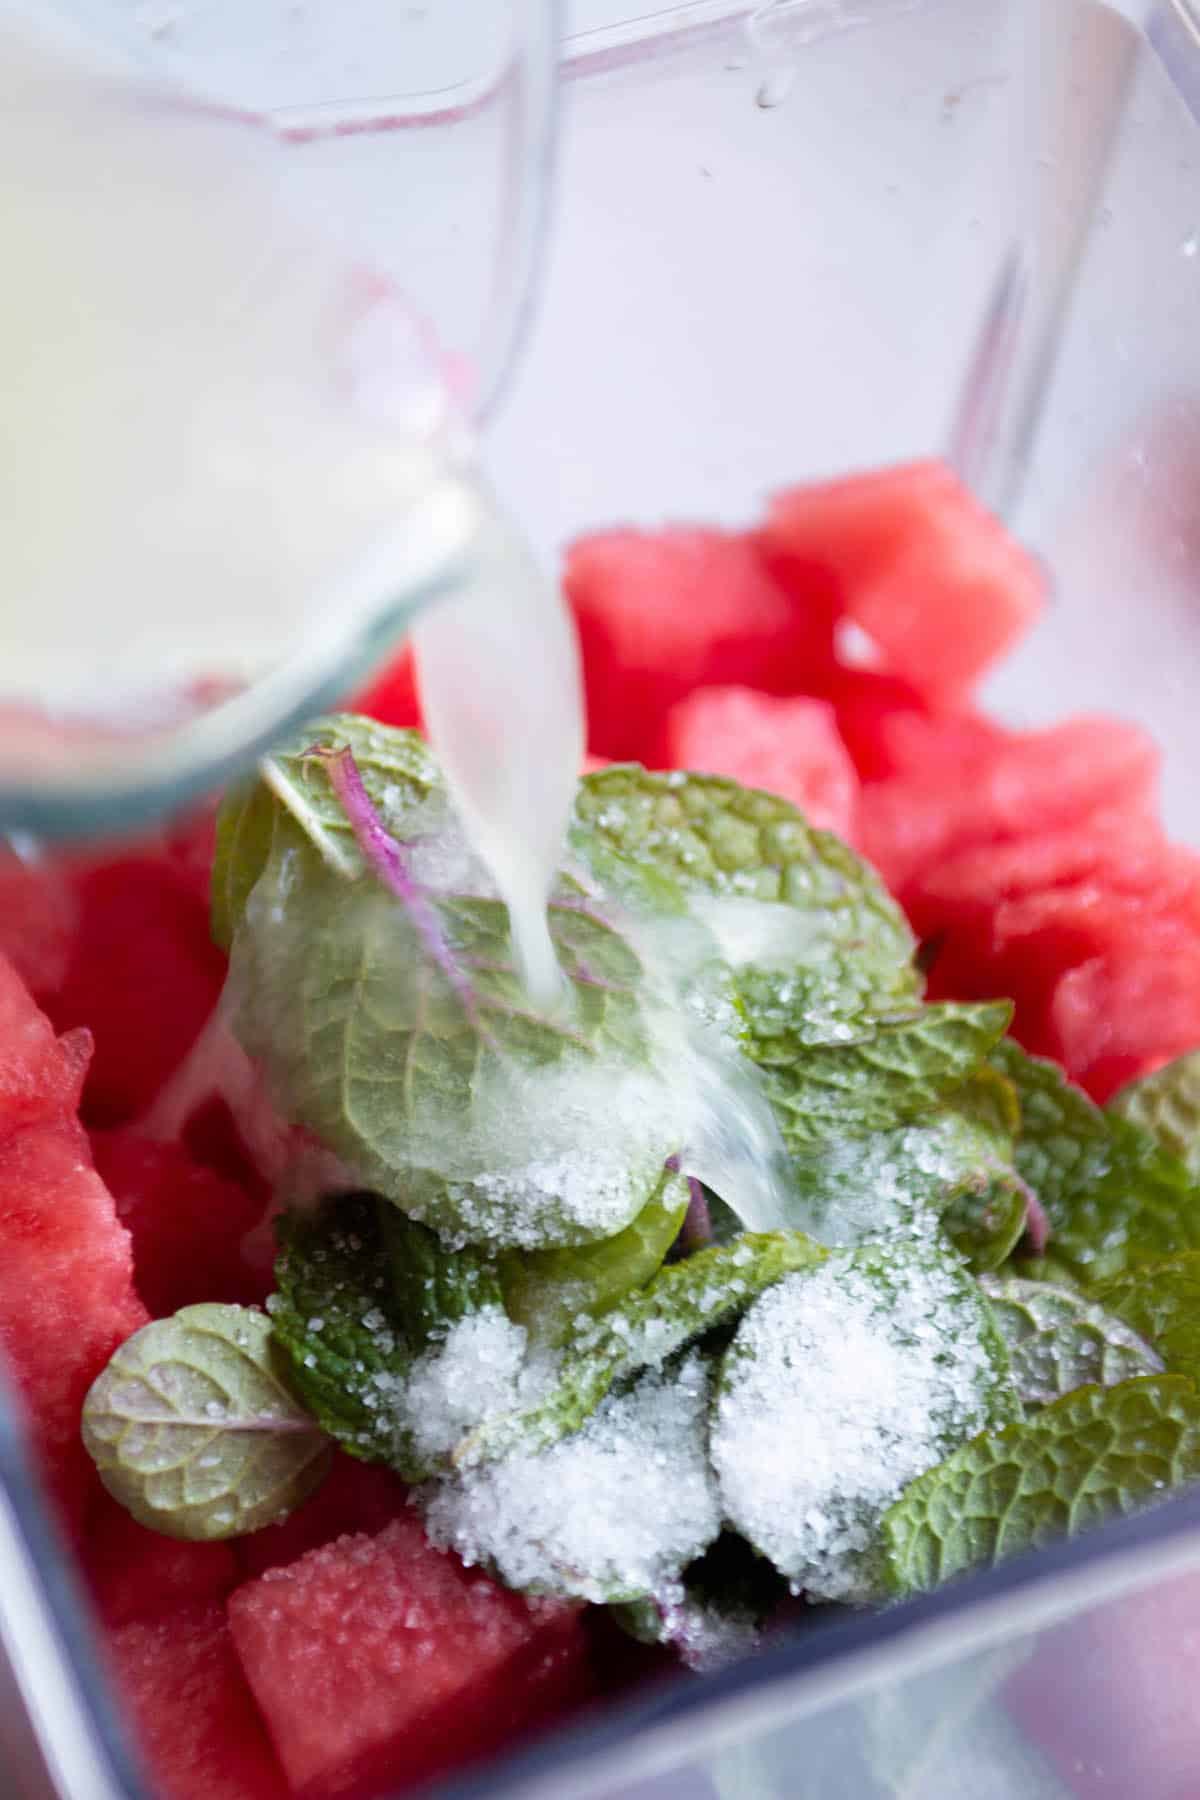 Blender jar with diced watermelon, mint leaves, salt and lime juice being poured in. 